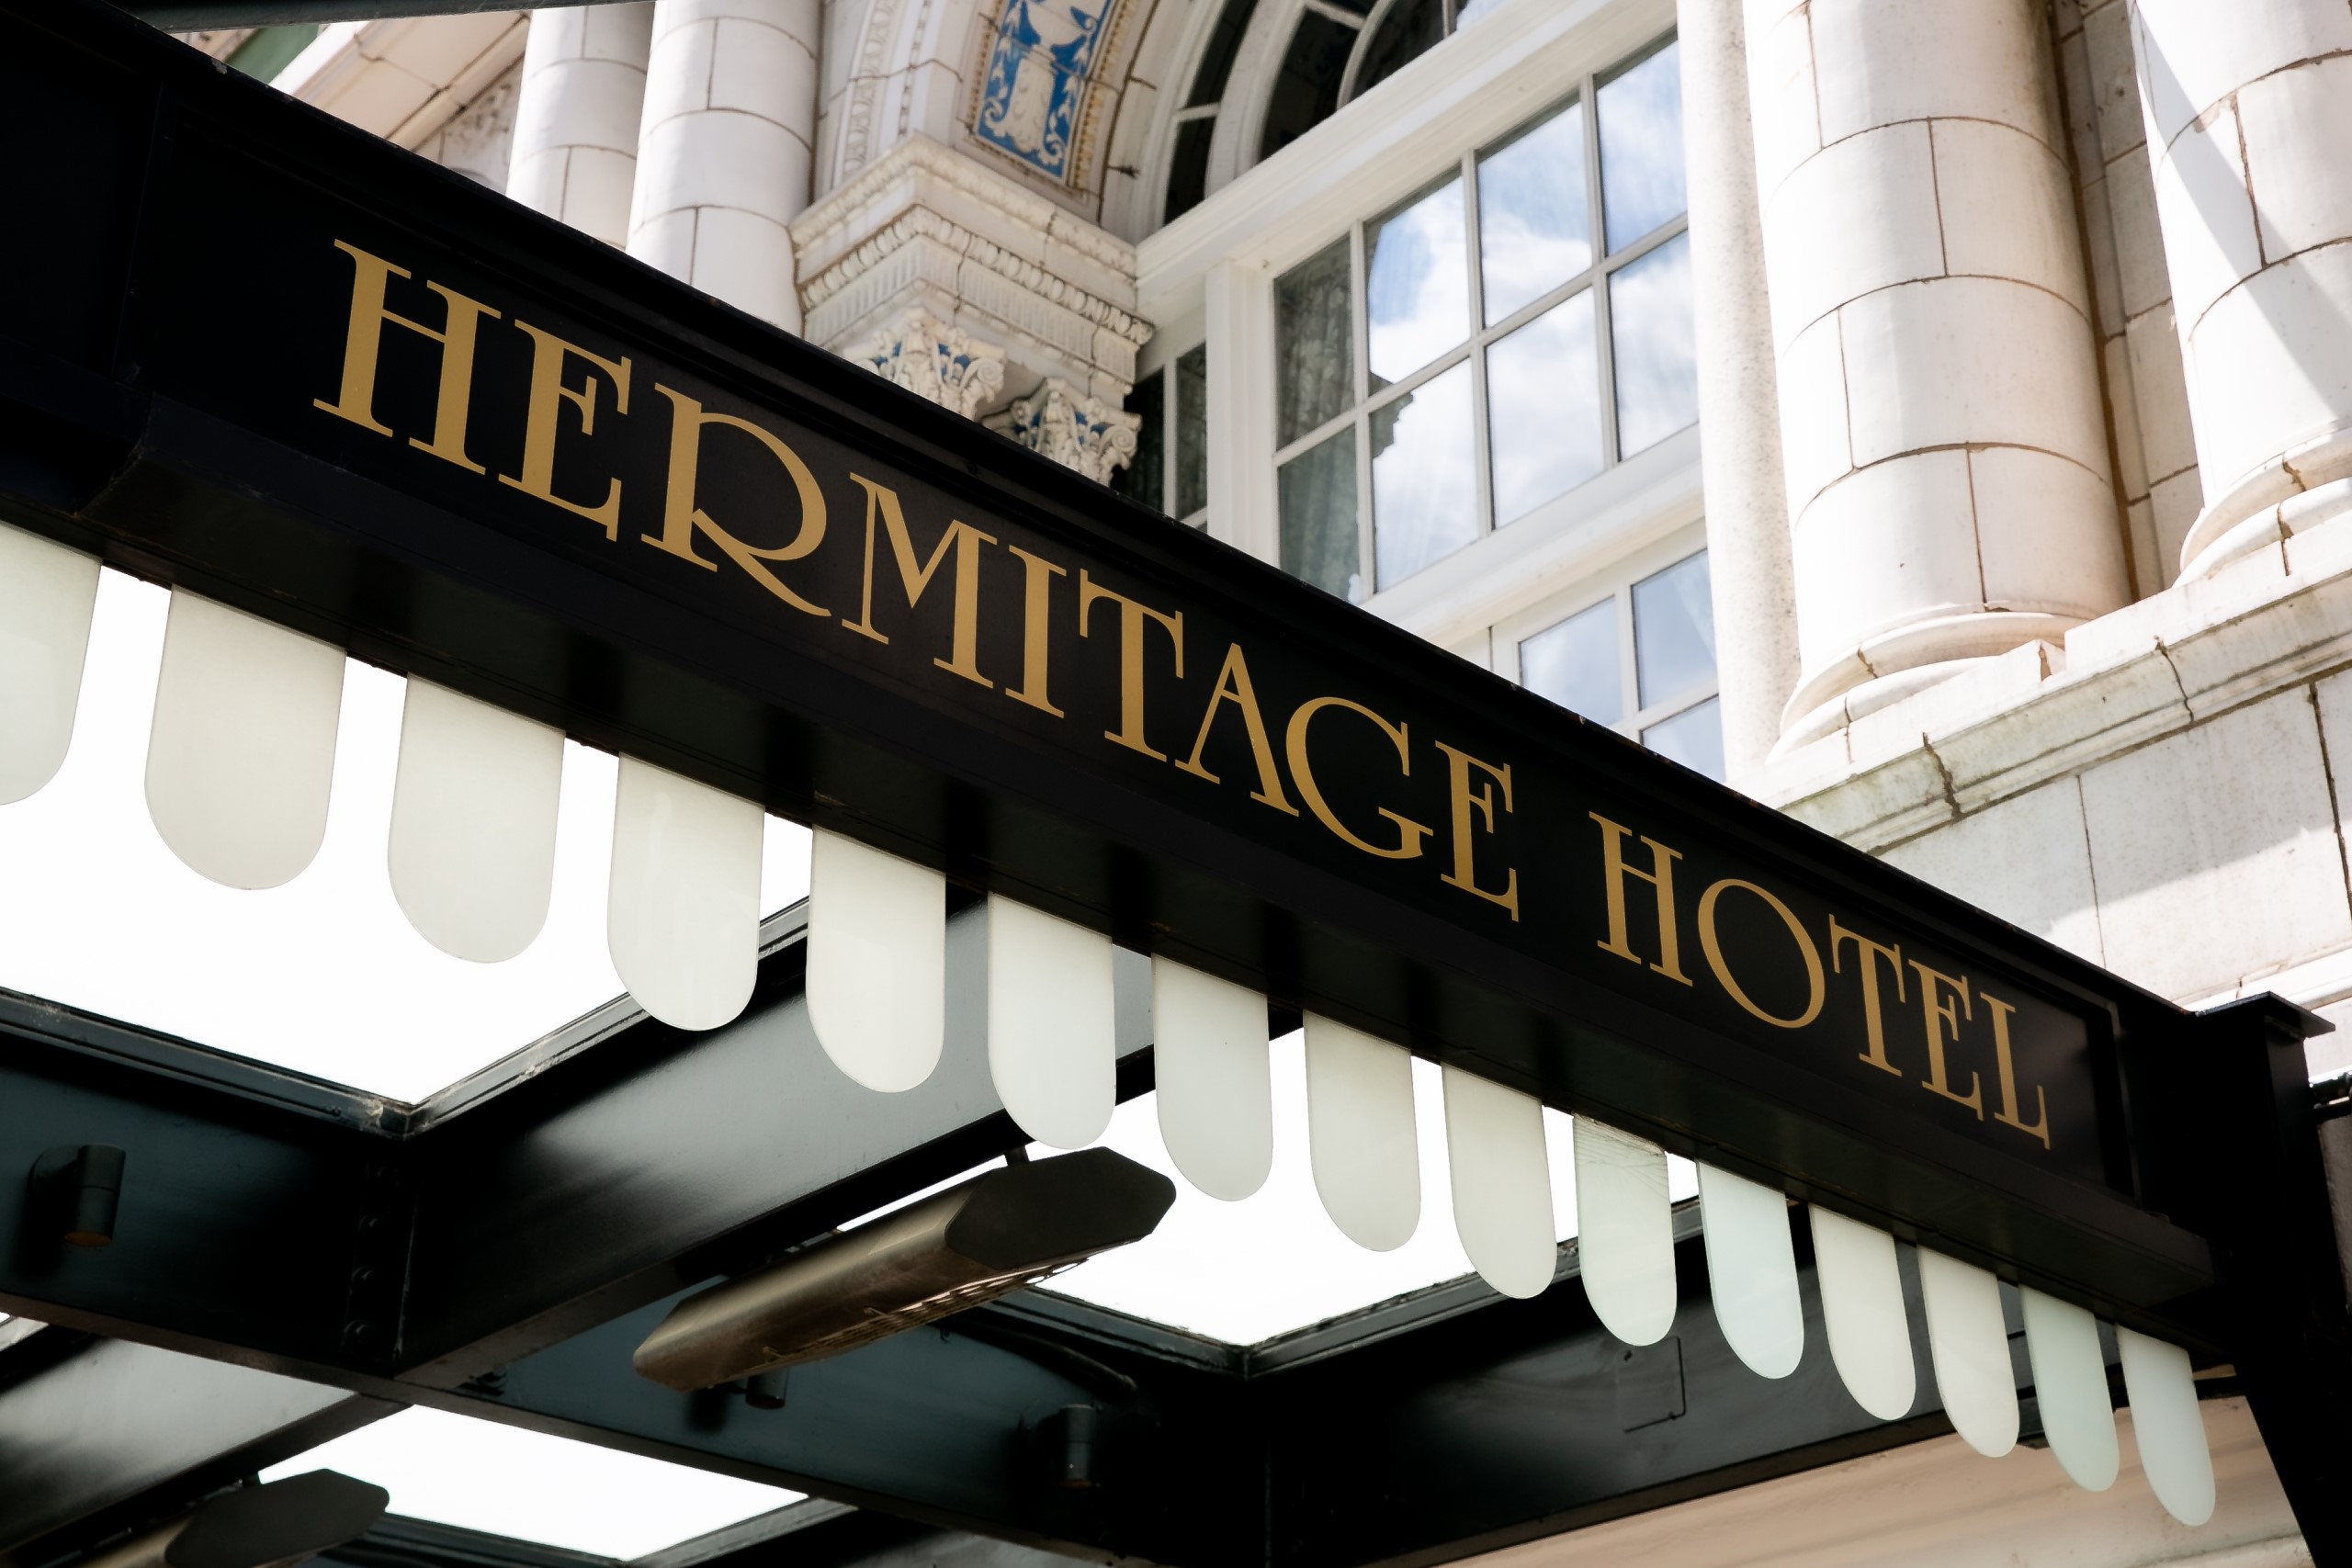 Hermitage Hotel front entrance sign